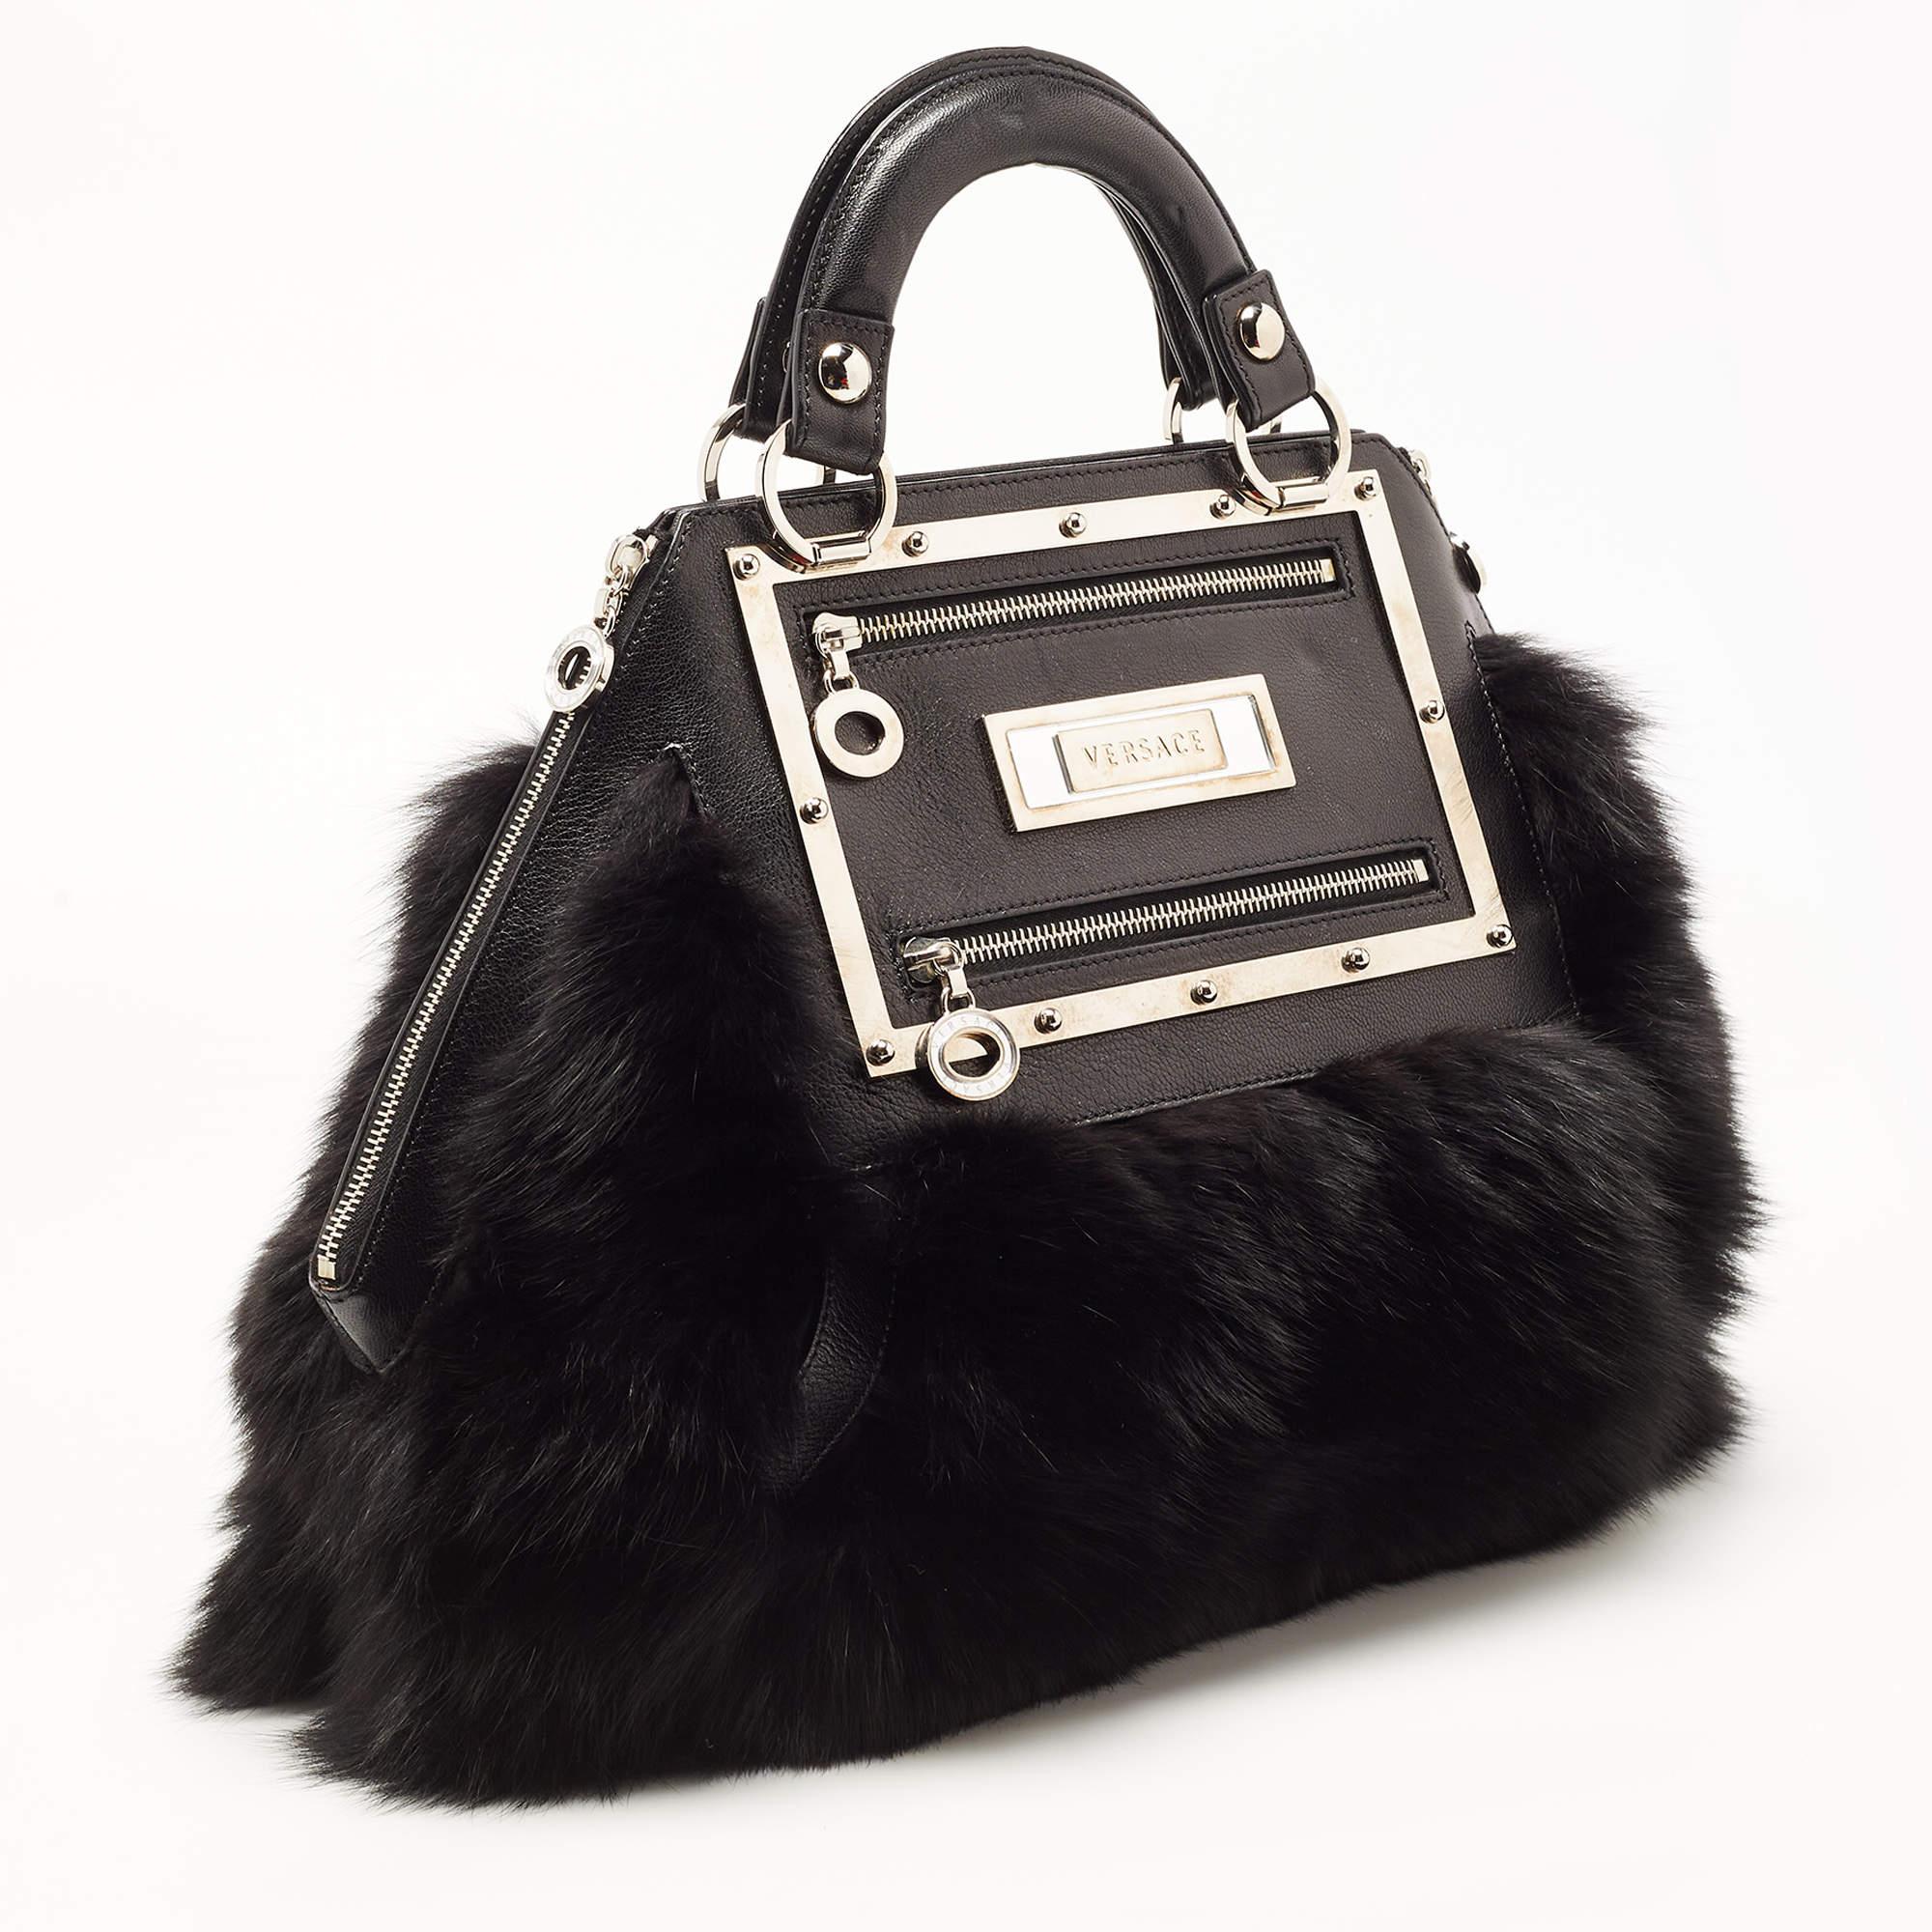 This Versace bag promises to take you through the day with ease, whether you're at work or out and about in the city. From its design to its structure, the fox fur and leather bag promises charm and durability.

